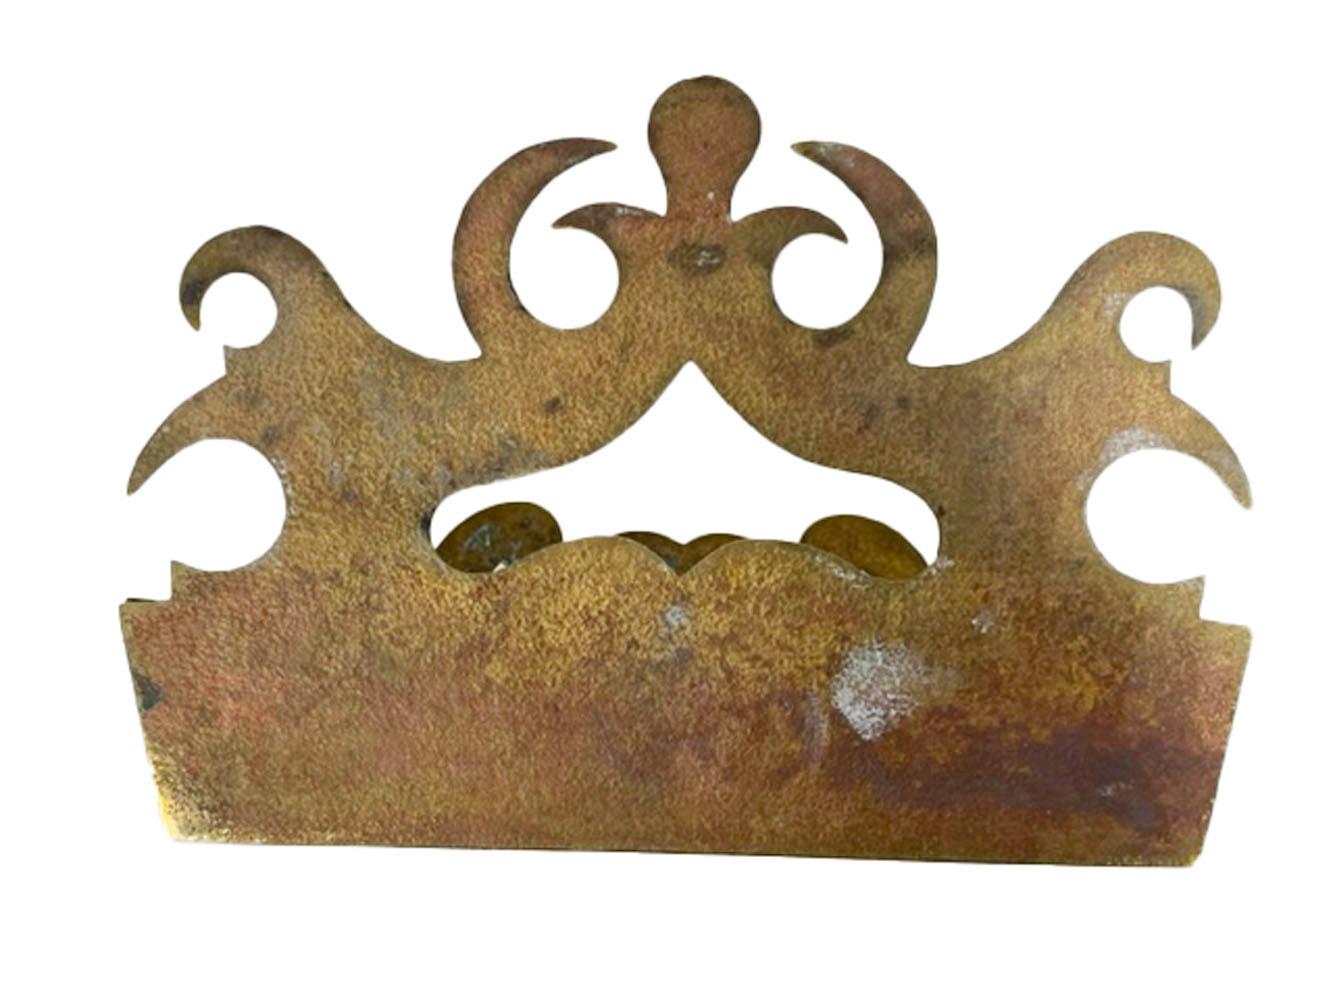 19th Century Cut and Pierced Brass Wall Pocket or Tidy In Good Condition For Sale In Nantucket, MA